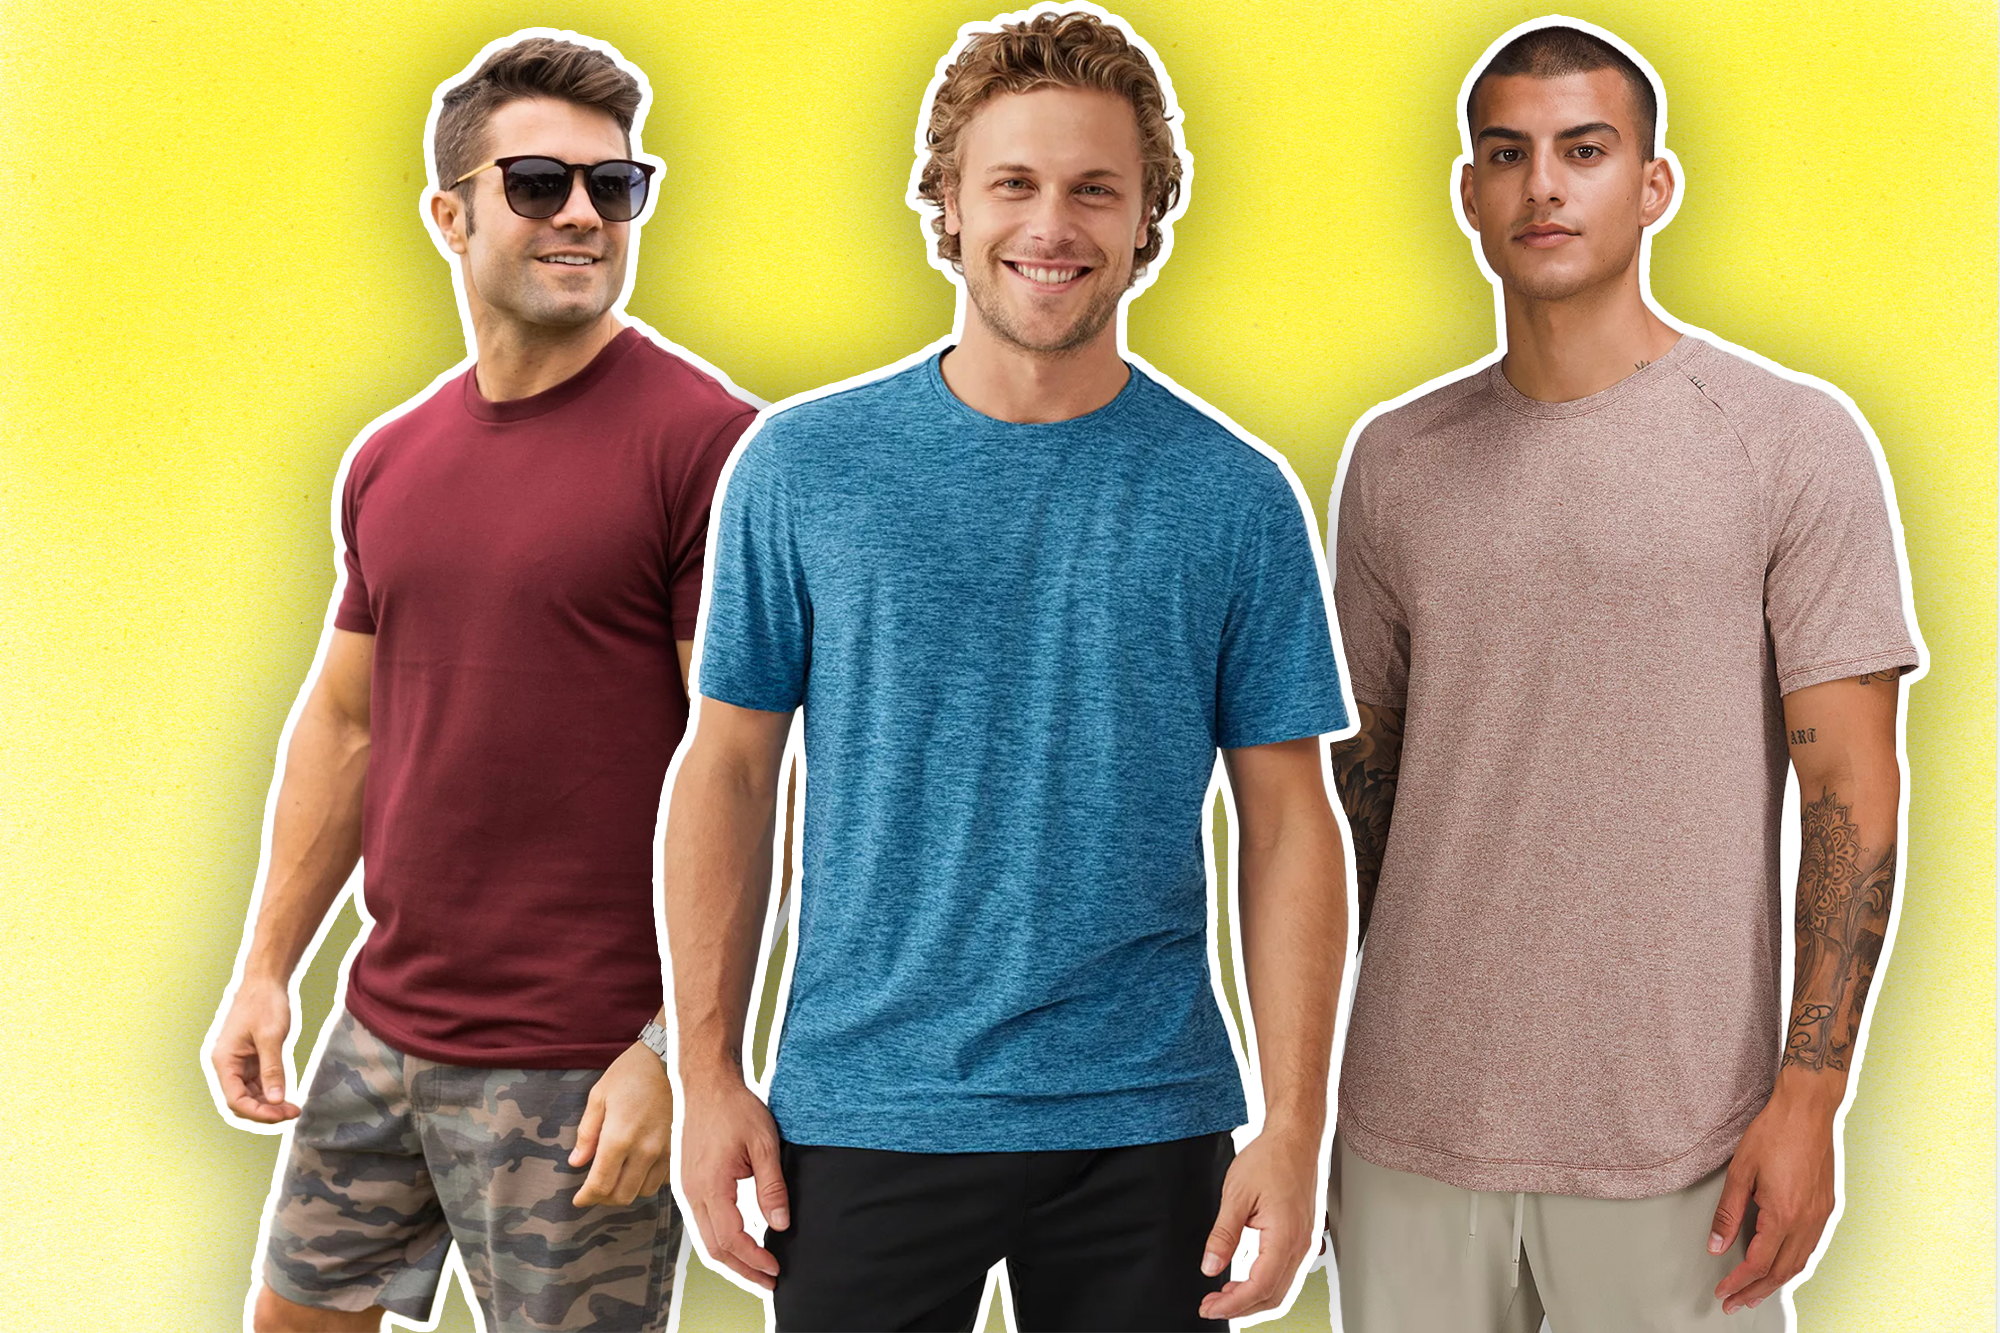 Men's Fashion the Latest Changing Trends in T-Shirts